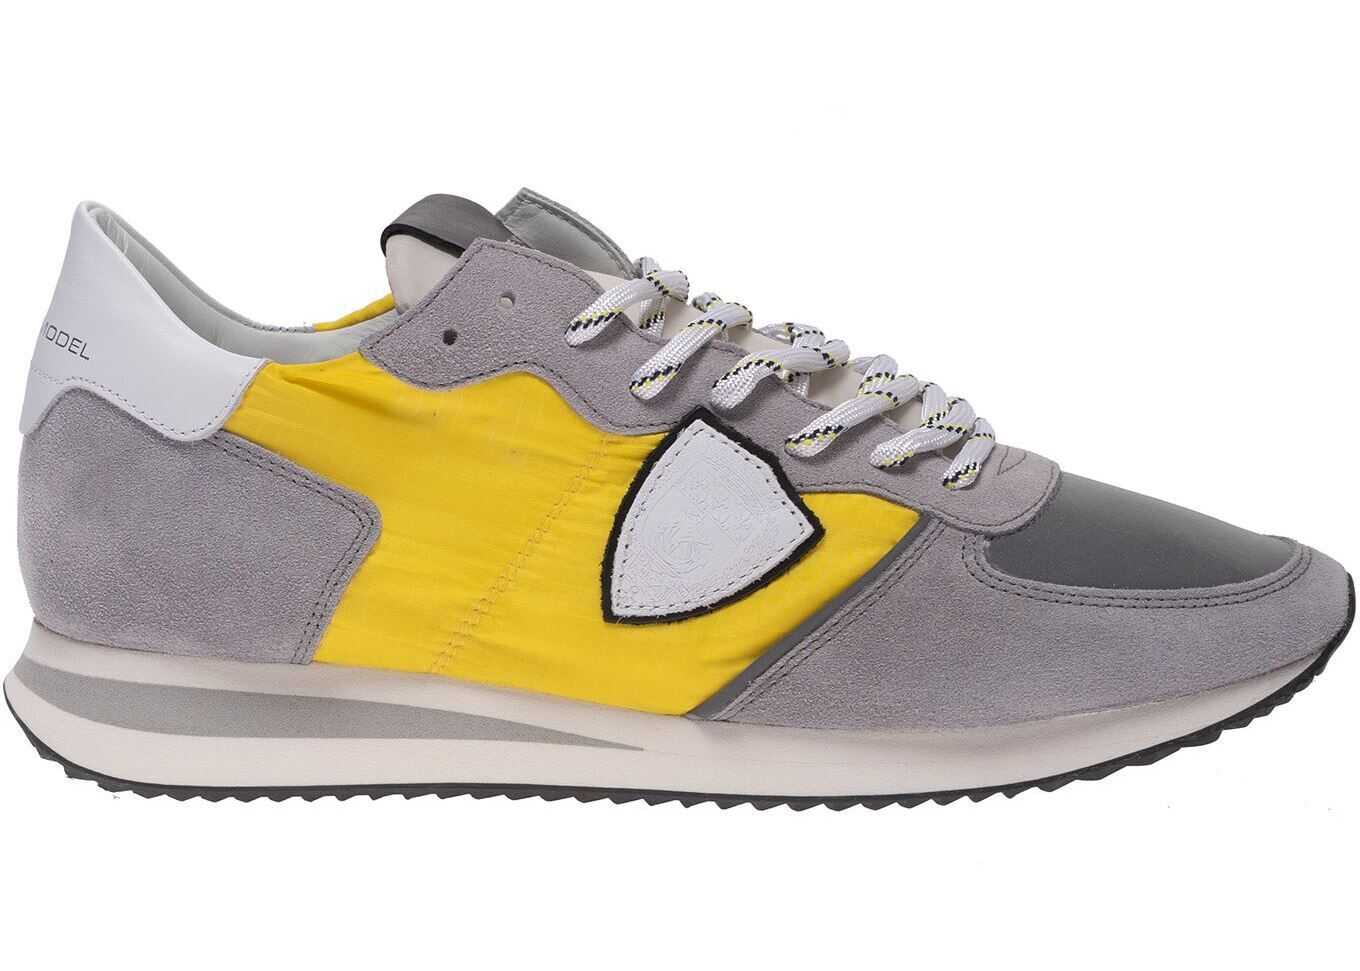 Philippe Model Trpx Sneakers In Grey And Yellow Grey